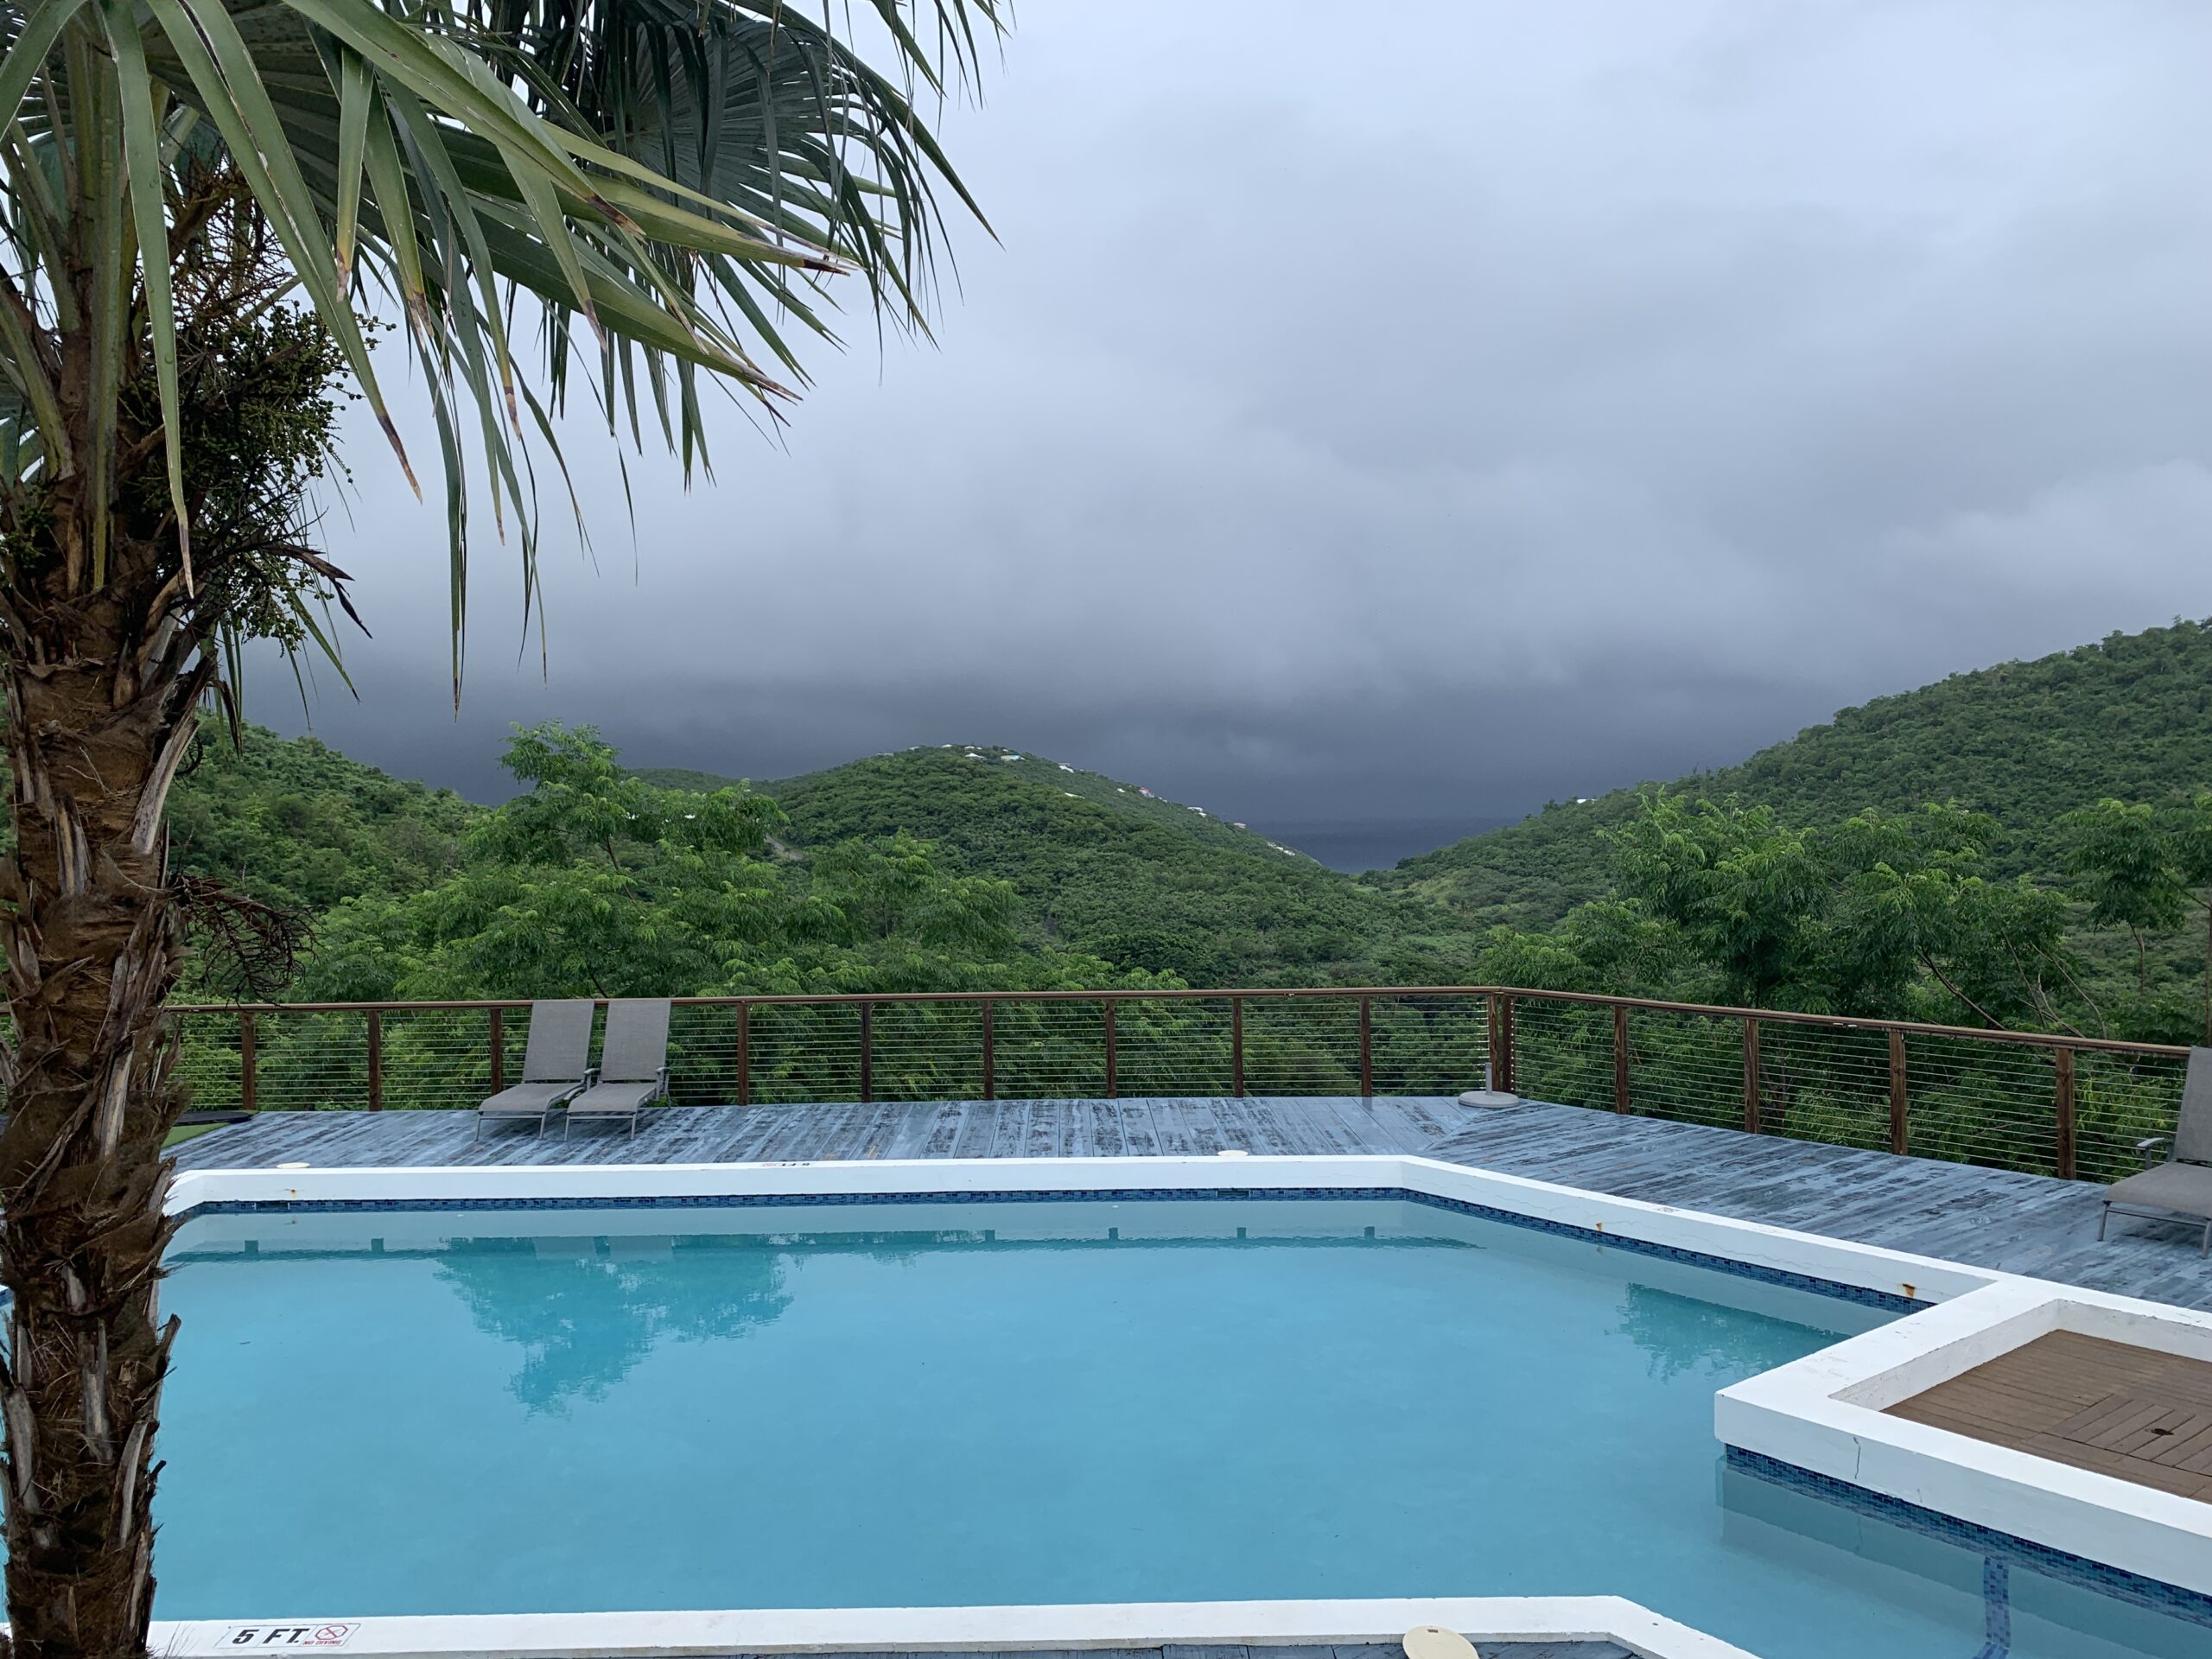  Tropical weather moves toward St. Thomas, USVI, on October 26, 2022. (Source photo by Jesse Daley)